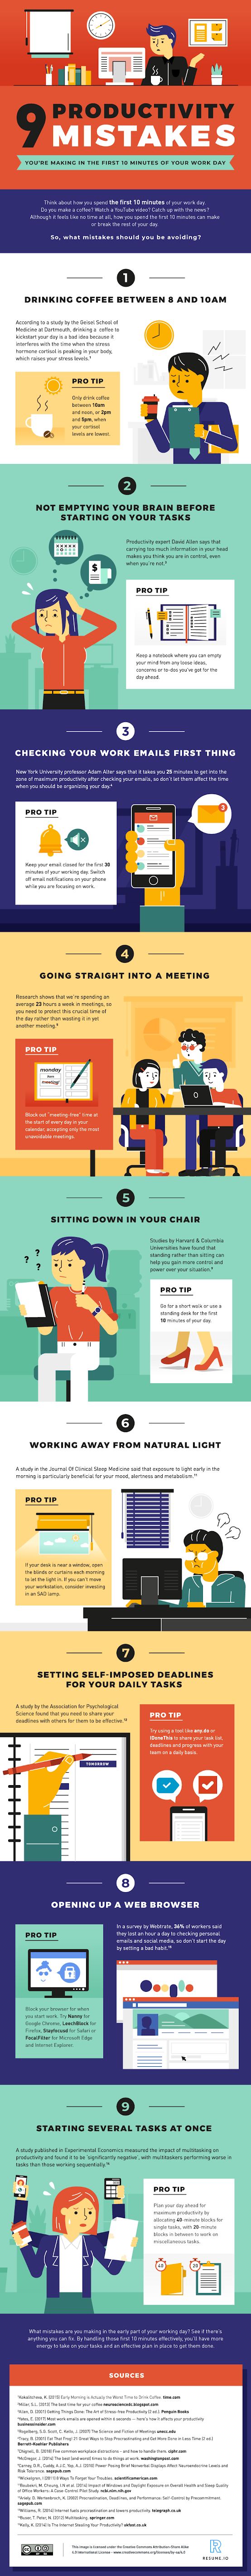 9 Productivity Mistakes You're Making in the First 10 Minutes of Your Work Day #infographic